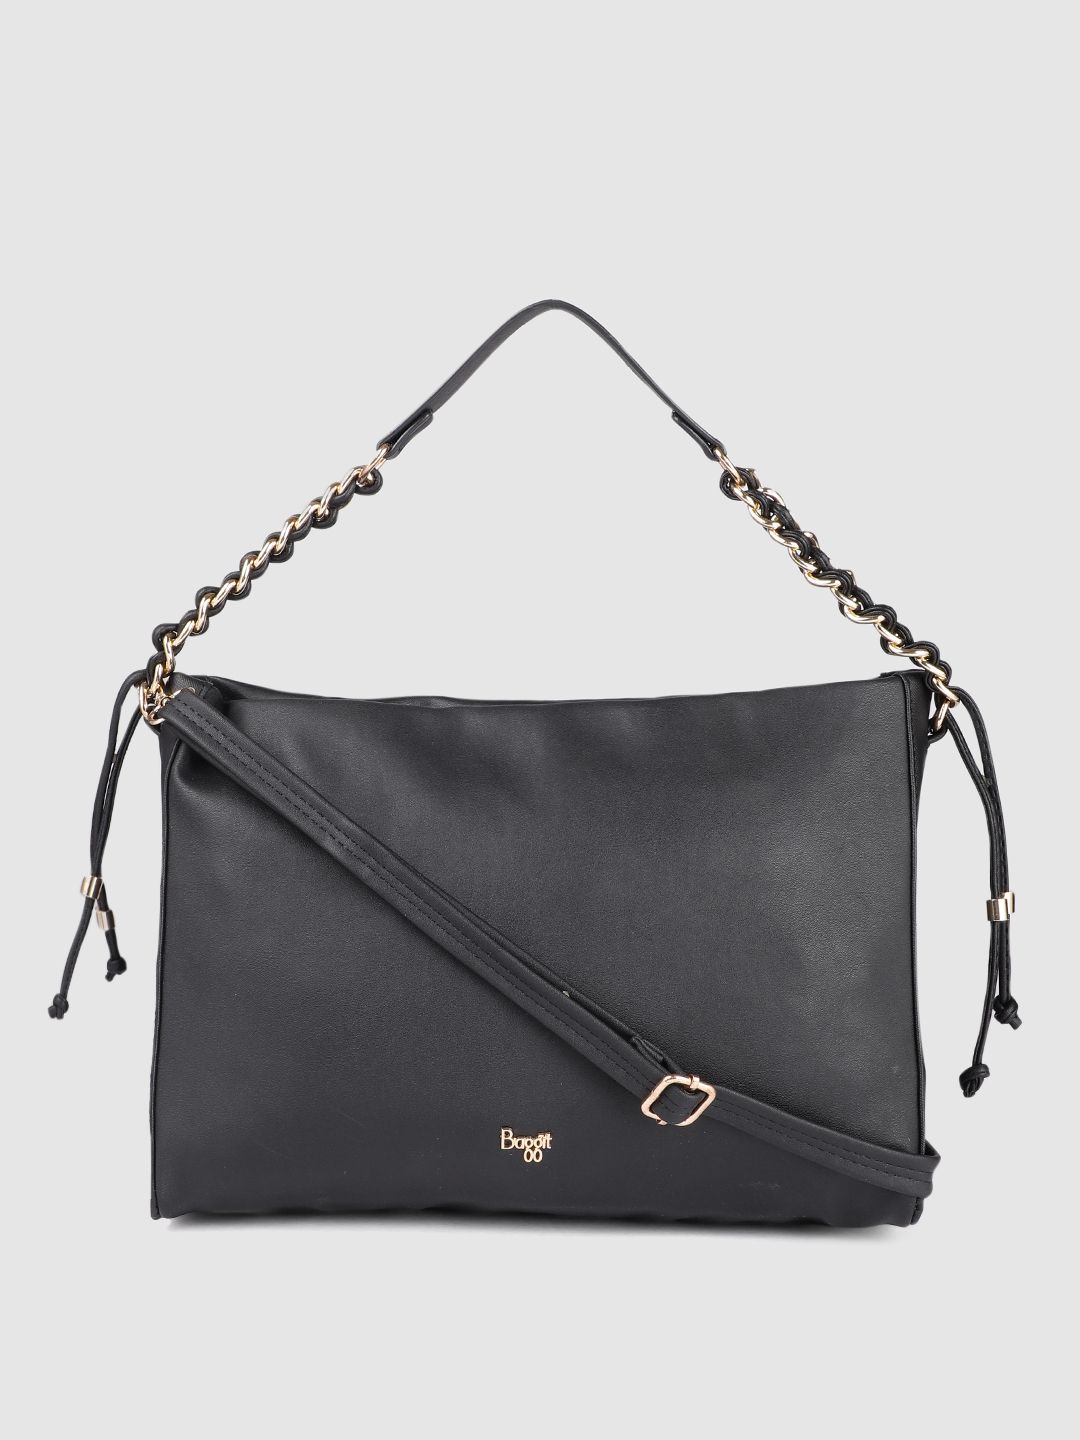 Baggit Black Solid Structured Sling Bag Price in India